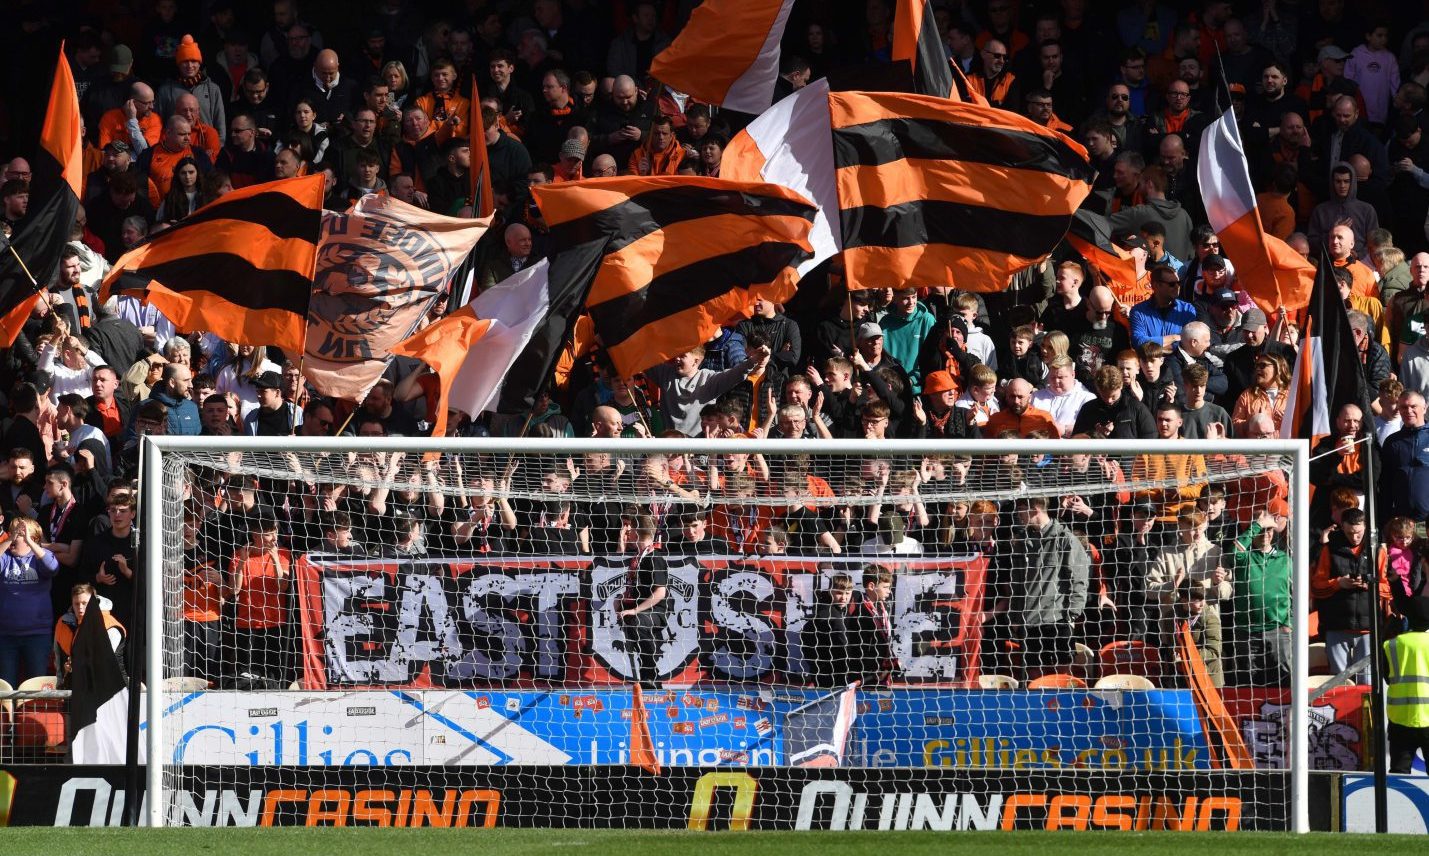 The Dundee United singing section at Tannadice